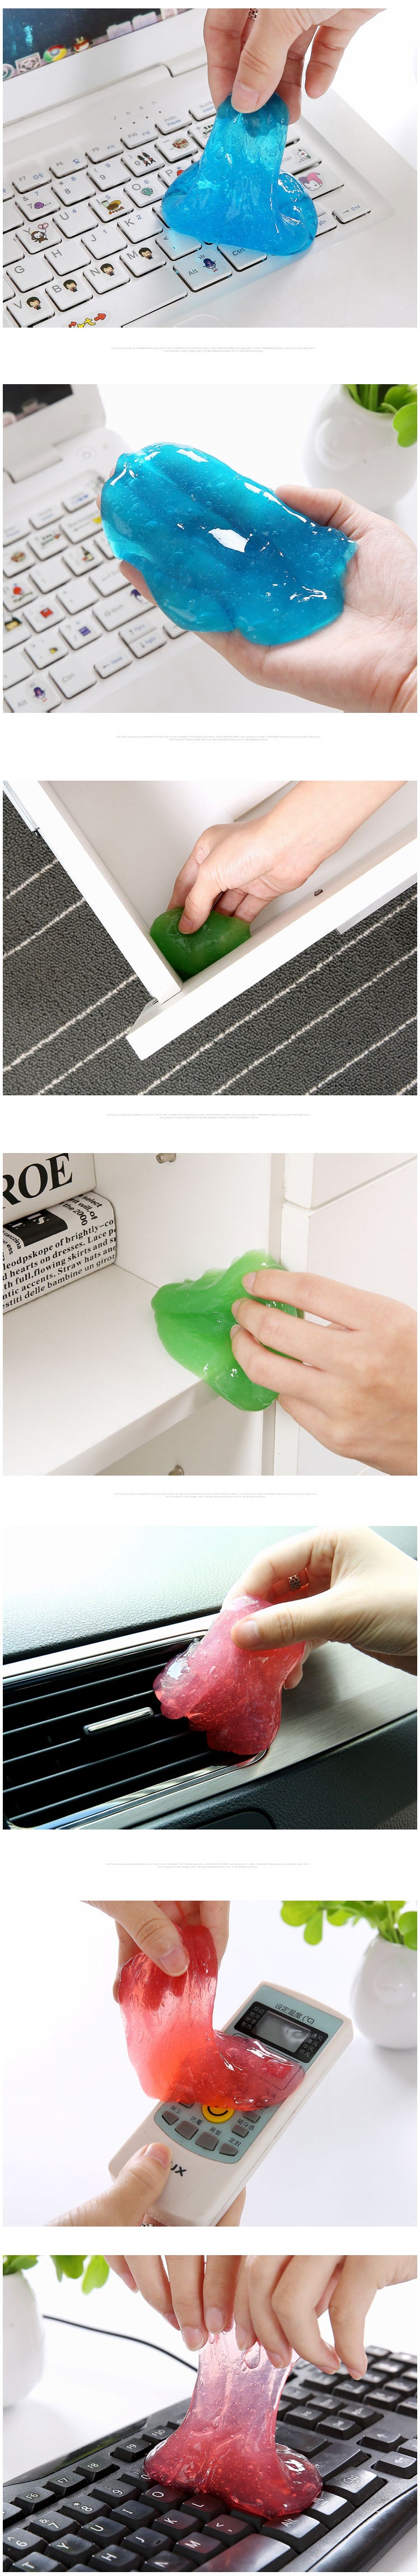 New Magic Dust Cleaner for Keyboards, Air Vent, Remote Control, Computers etc